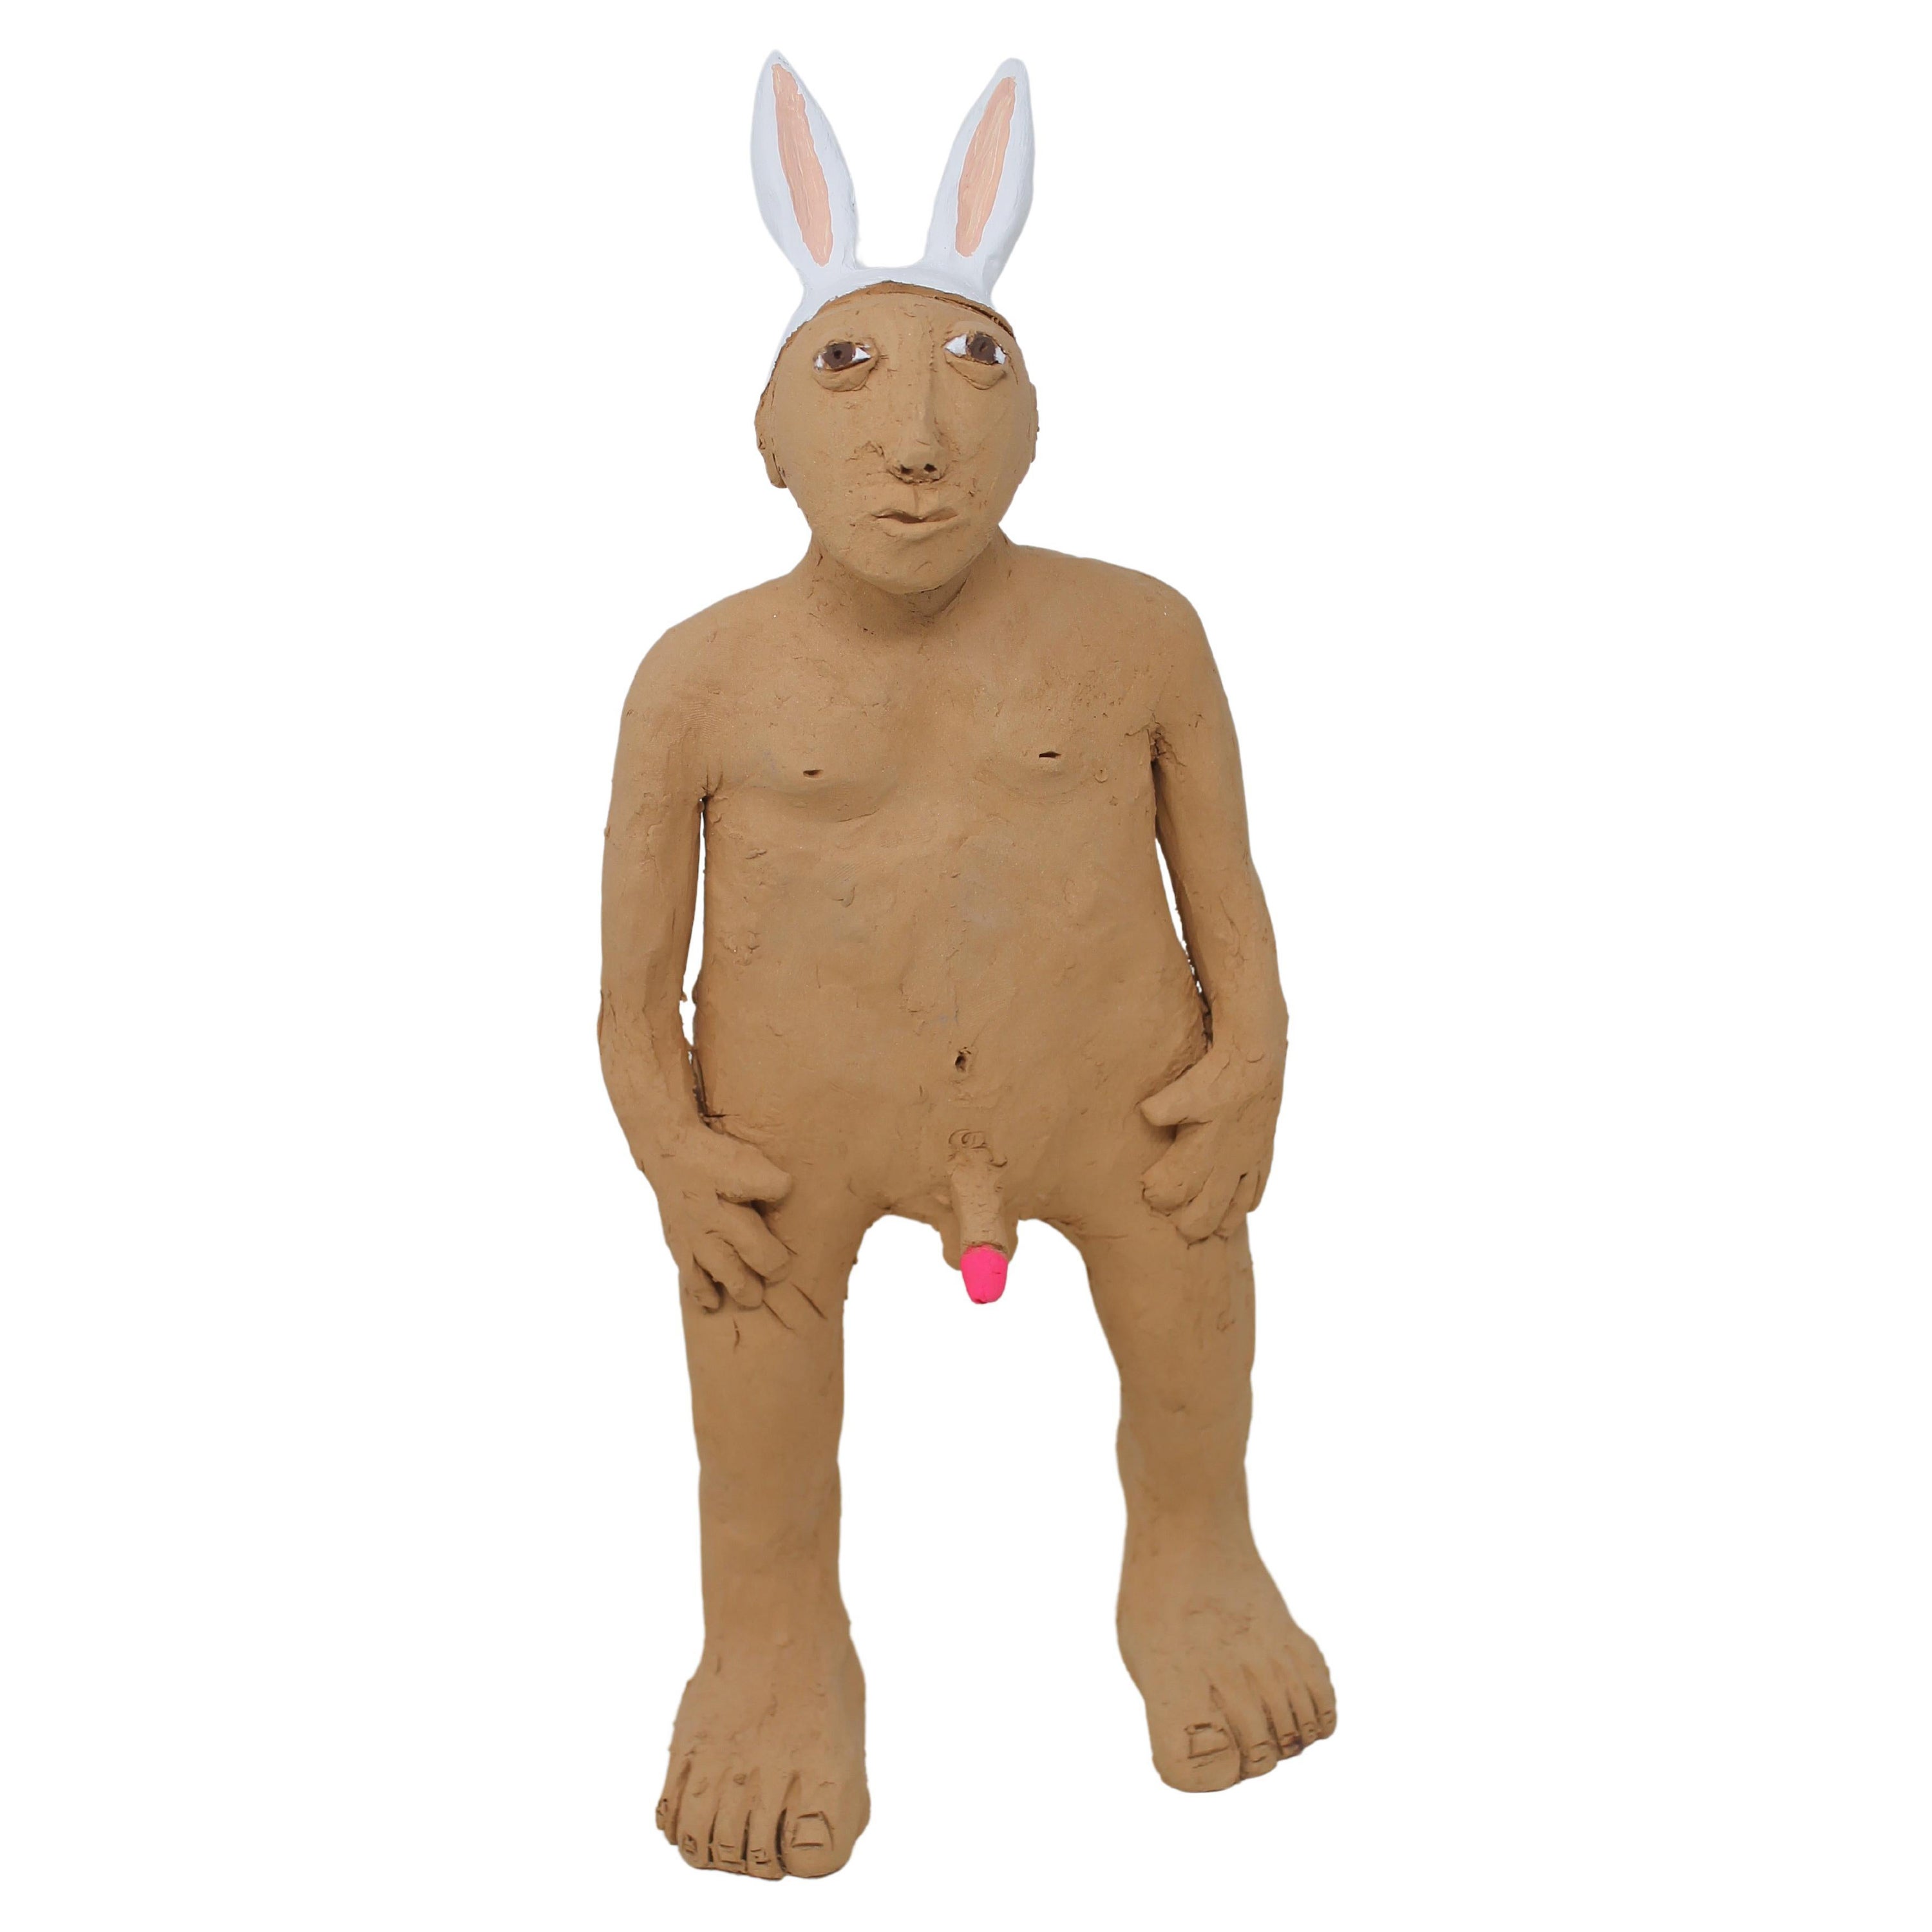 Freaklab Big Humans Made Entirely by Hand in Terracotta, Man-Rabbit For Sale